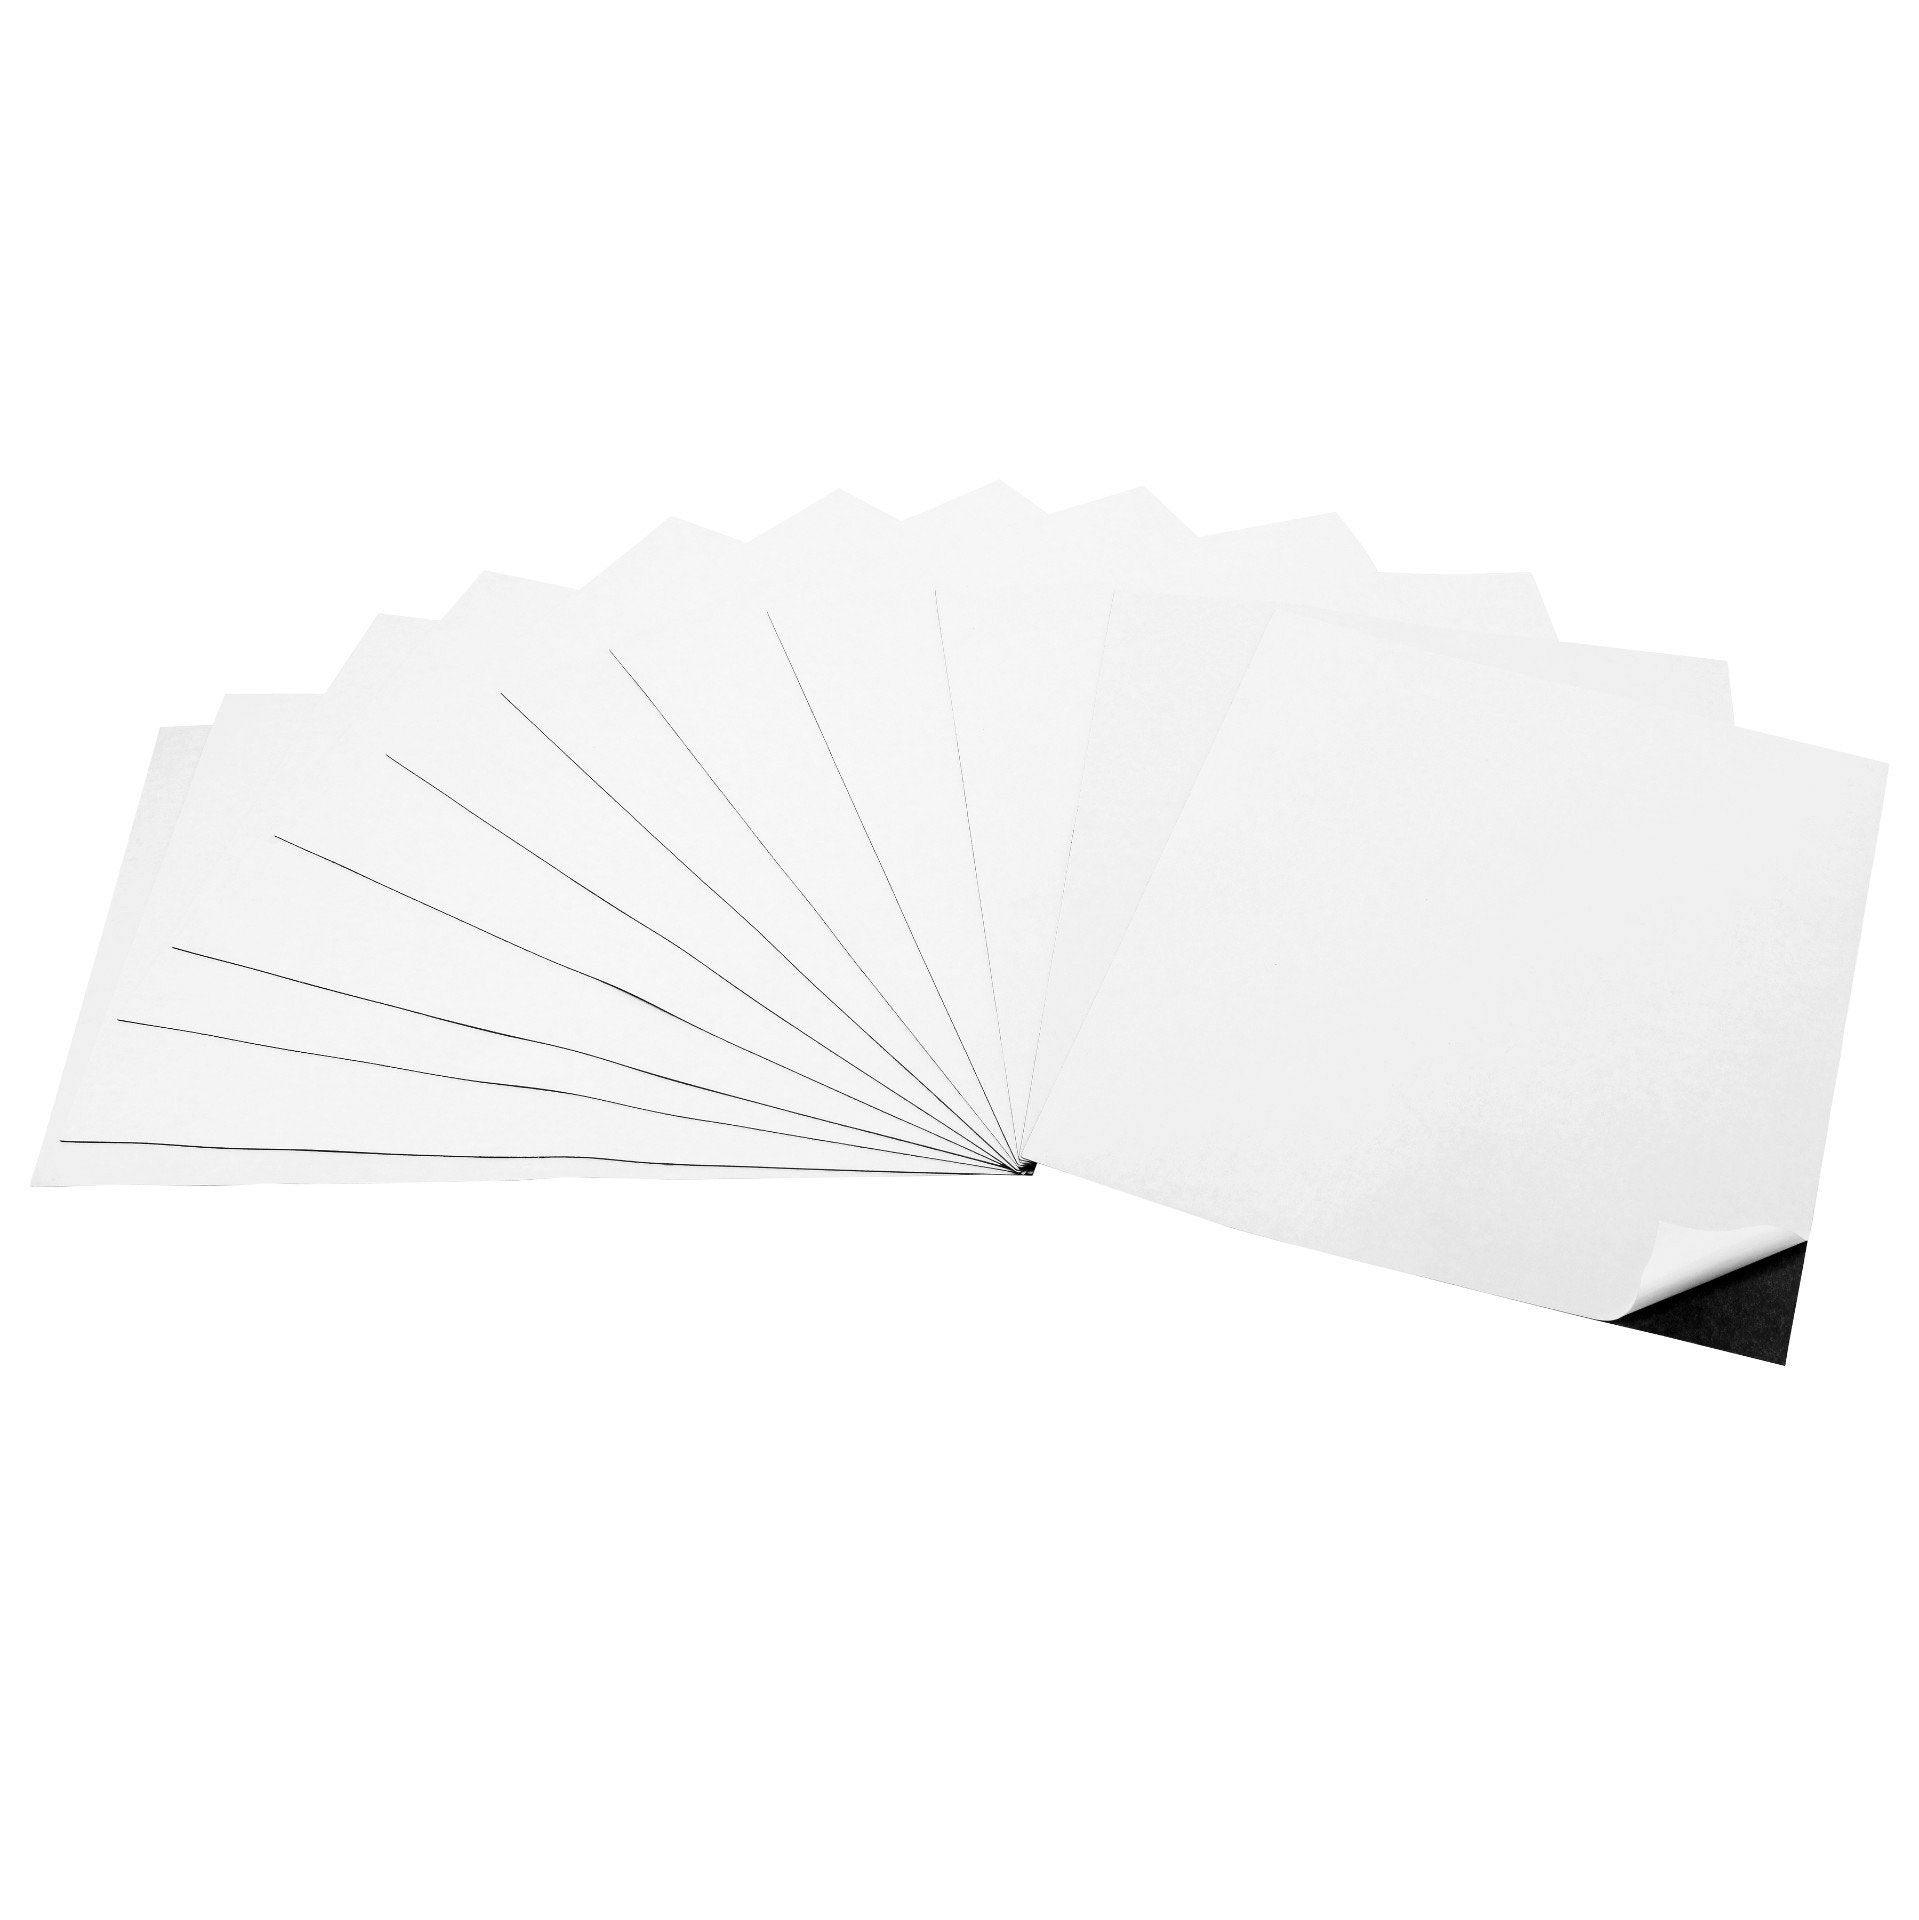 Flexible Magnet Sheets and Squares for Your Projects